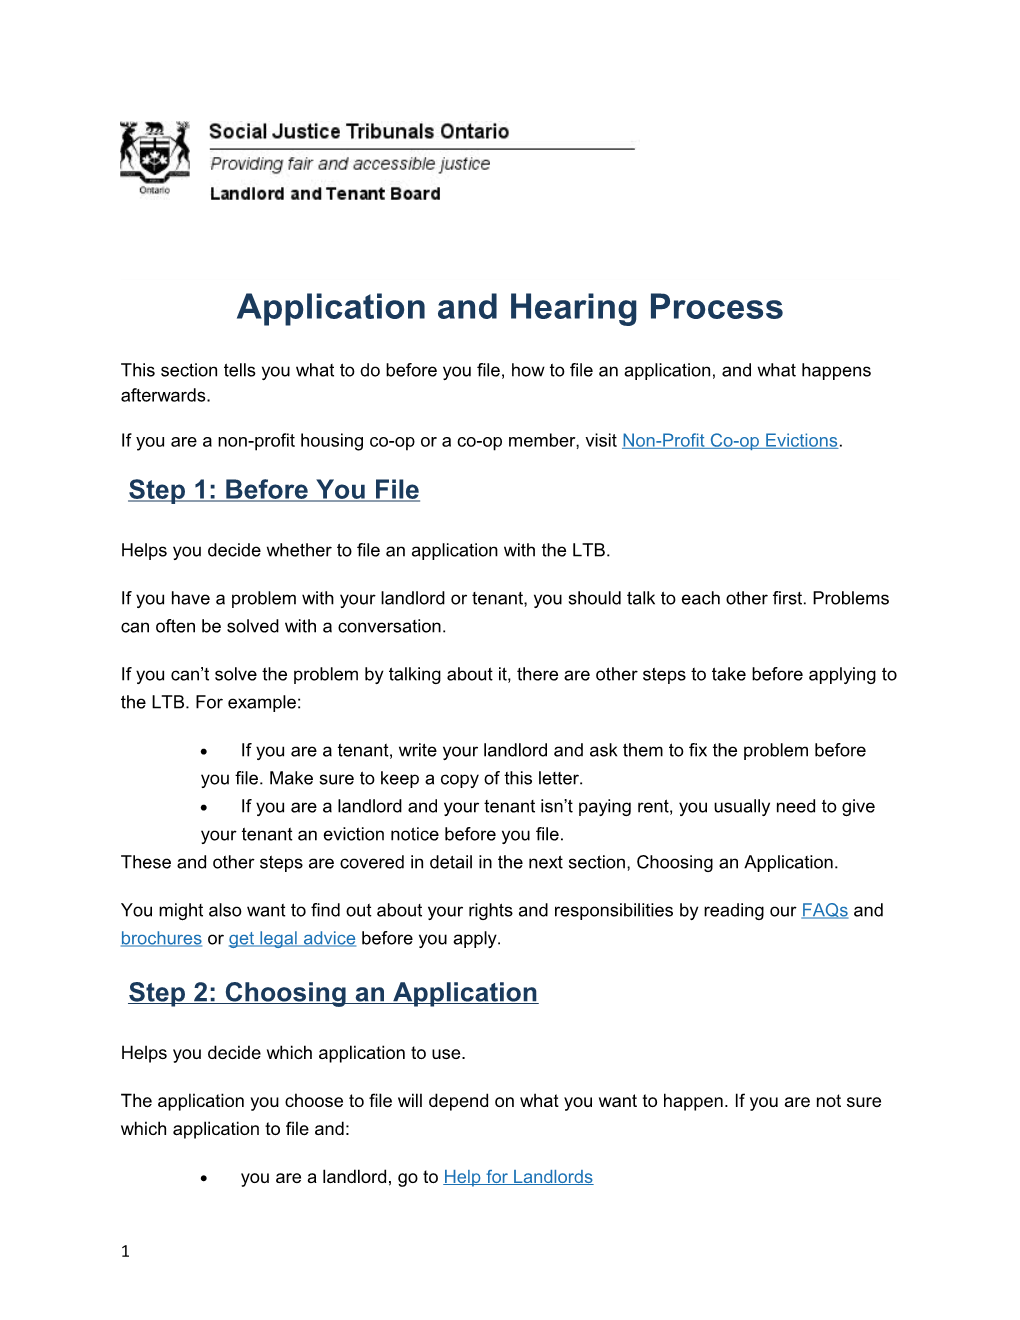 Application and Hearing Process